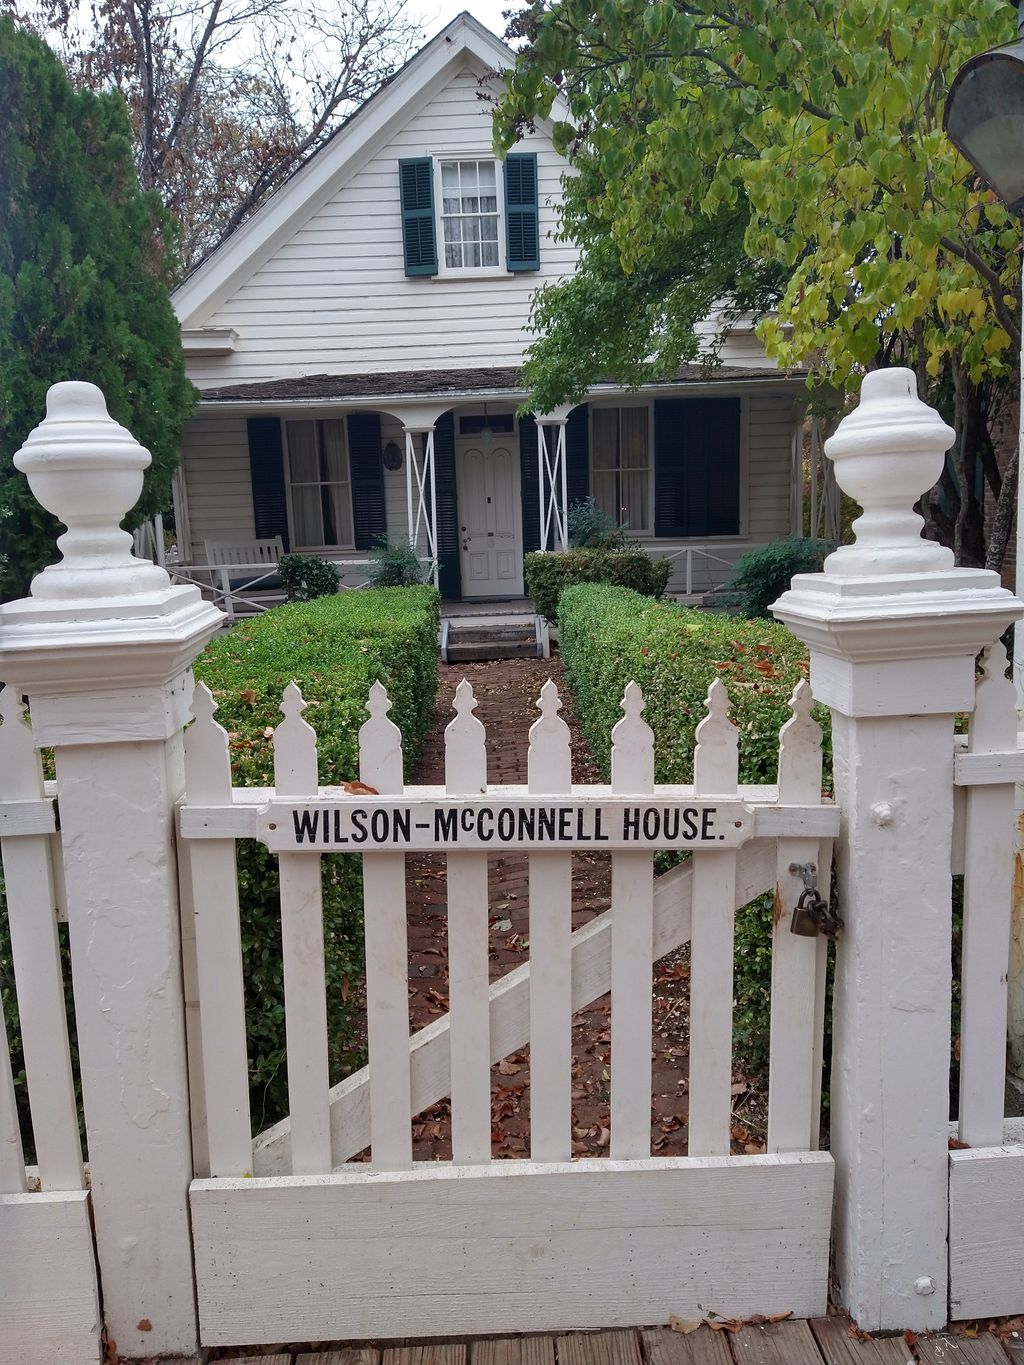 Wilson- McConnell House